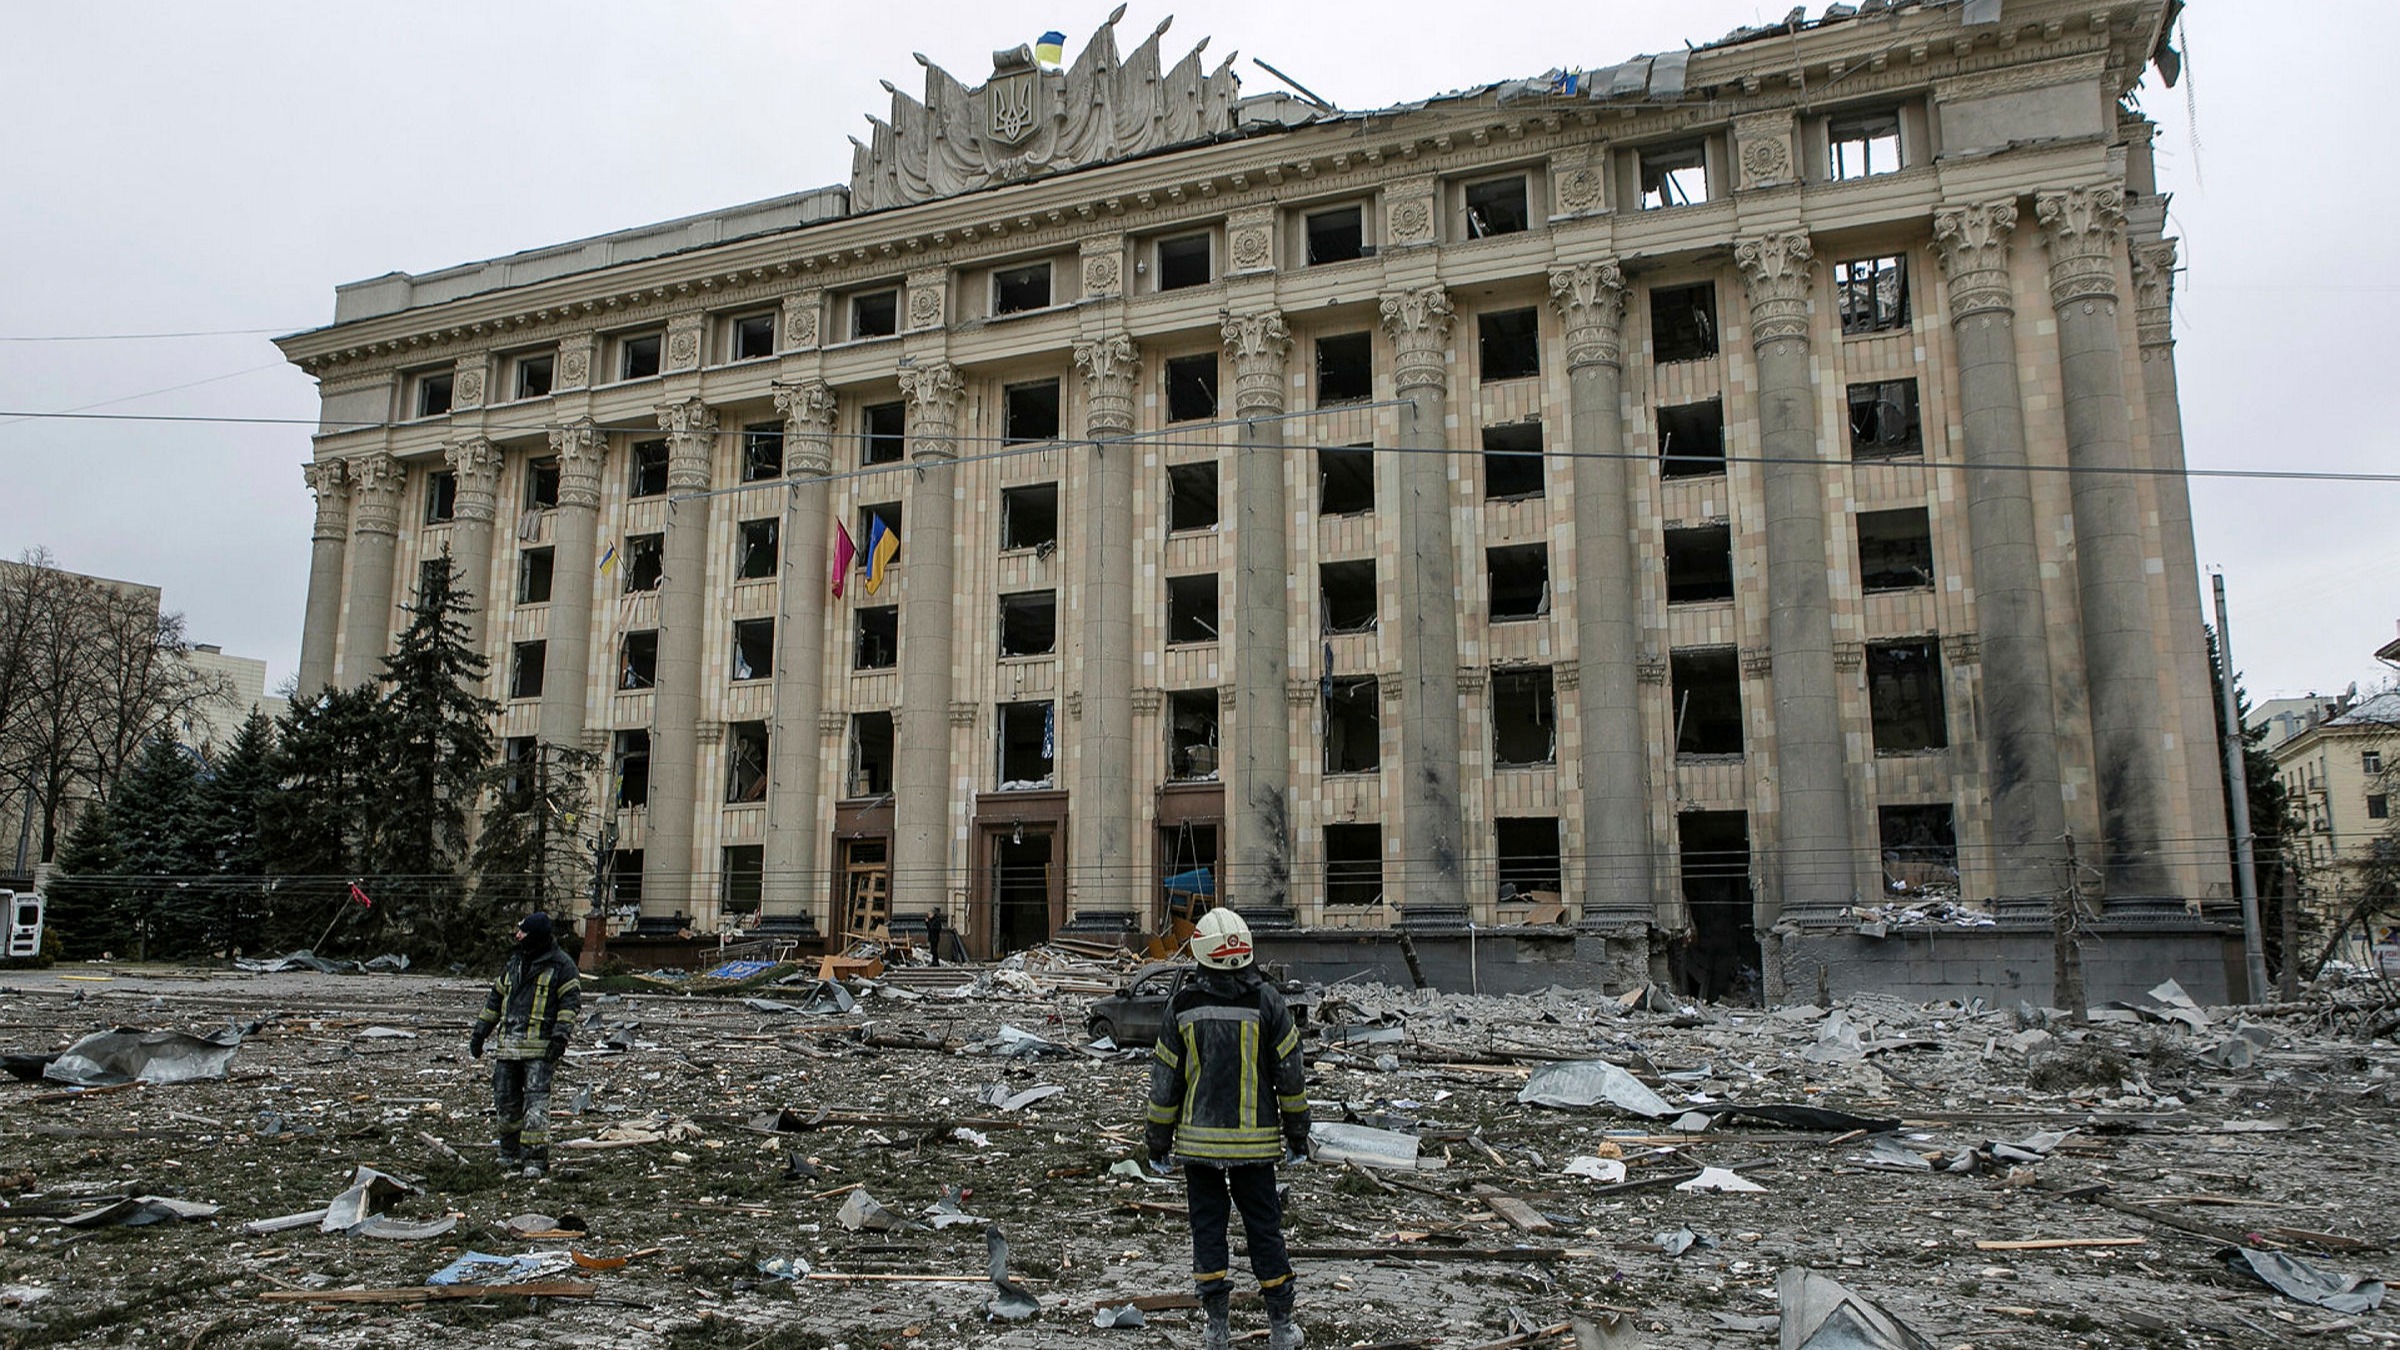 They've turned it into hell': disbelief at Russia's Kharkiv onslaught | Financial Times